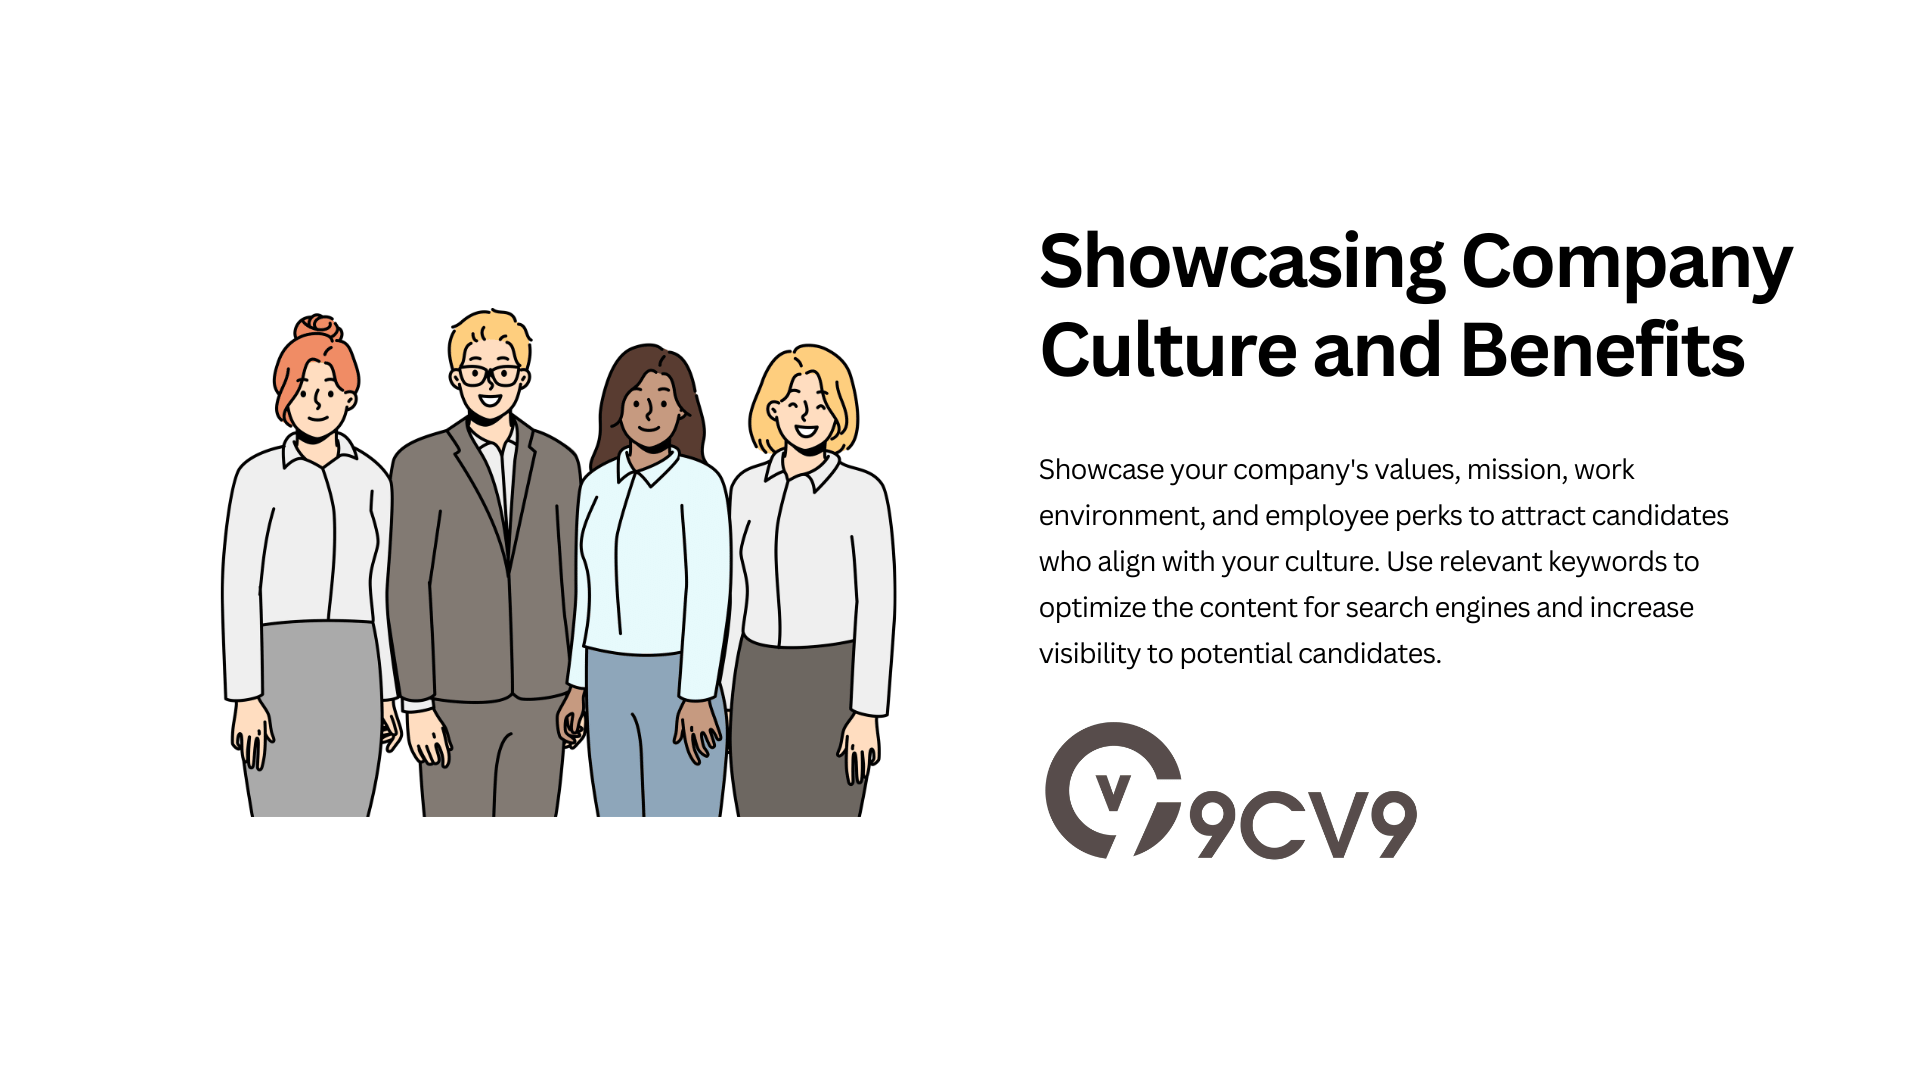 Showcasing Company Culture and Benefits